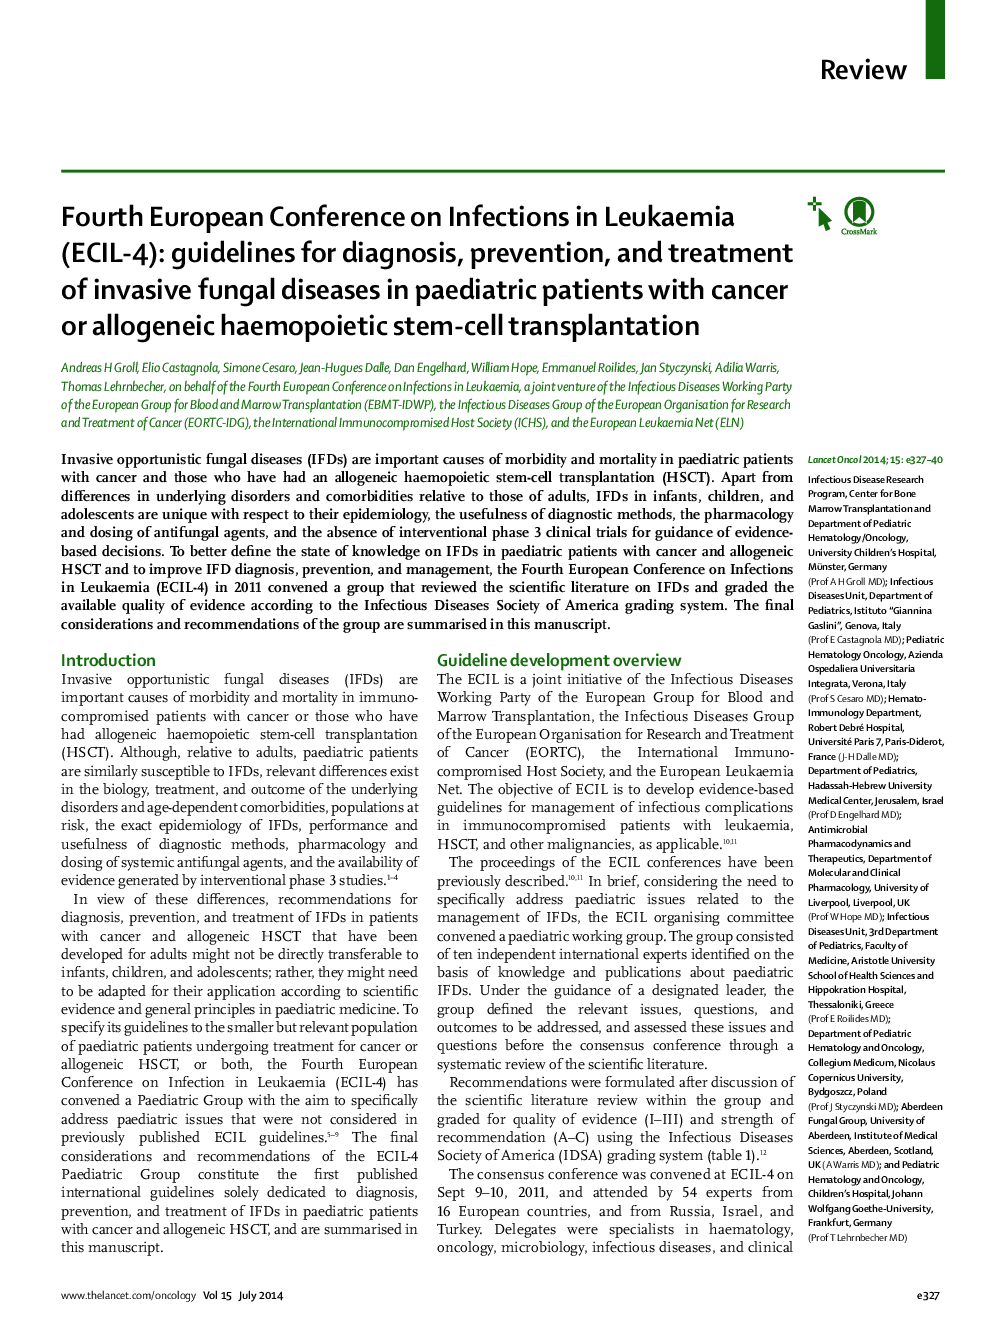 Fourth European Conference on Infections in Leukaemia (ECIL-4): guidelines for diagnosis, prevention, and treatment of invasive fungal diseases in paediatric patients with cancer or allogeneic haemopoietic stem-cell transplantation